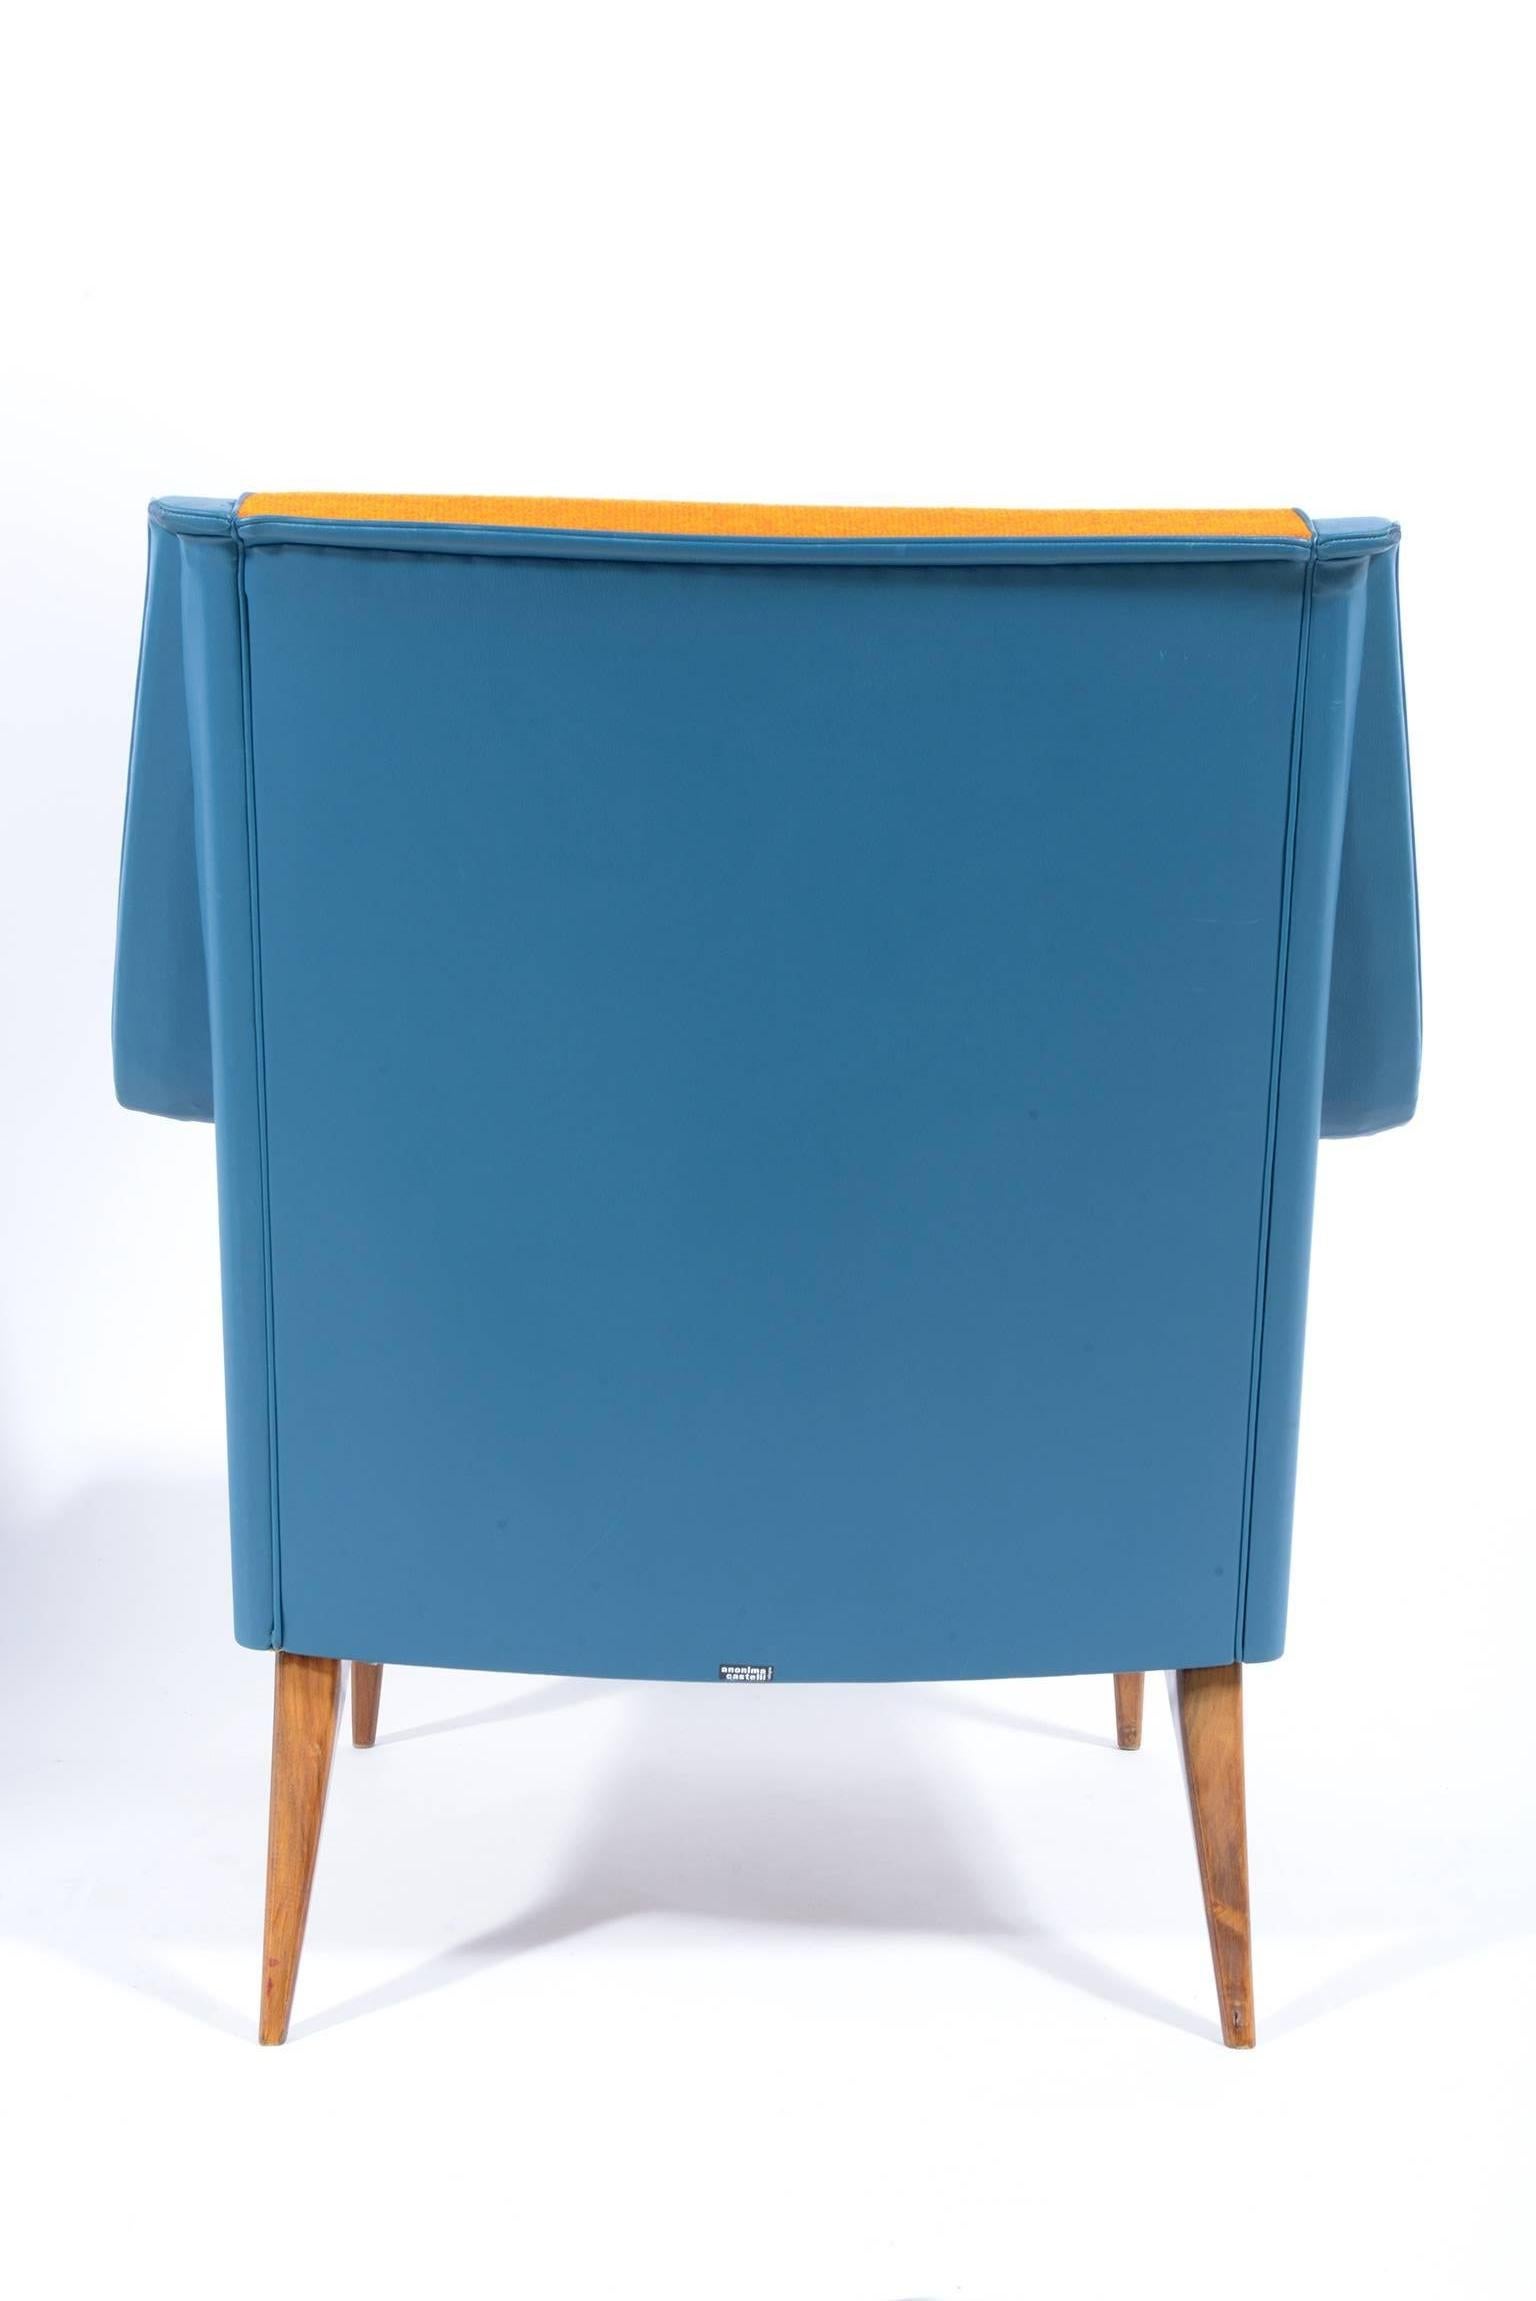 Castelli Signed Midcentury Pair of Armchairs Original Orange-Bleu Upholstery In Good Condition For Sale In Firenze, Toscana